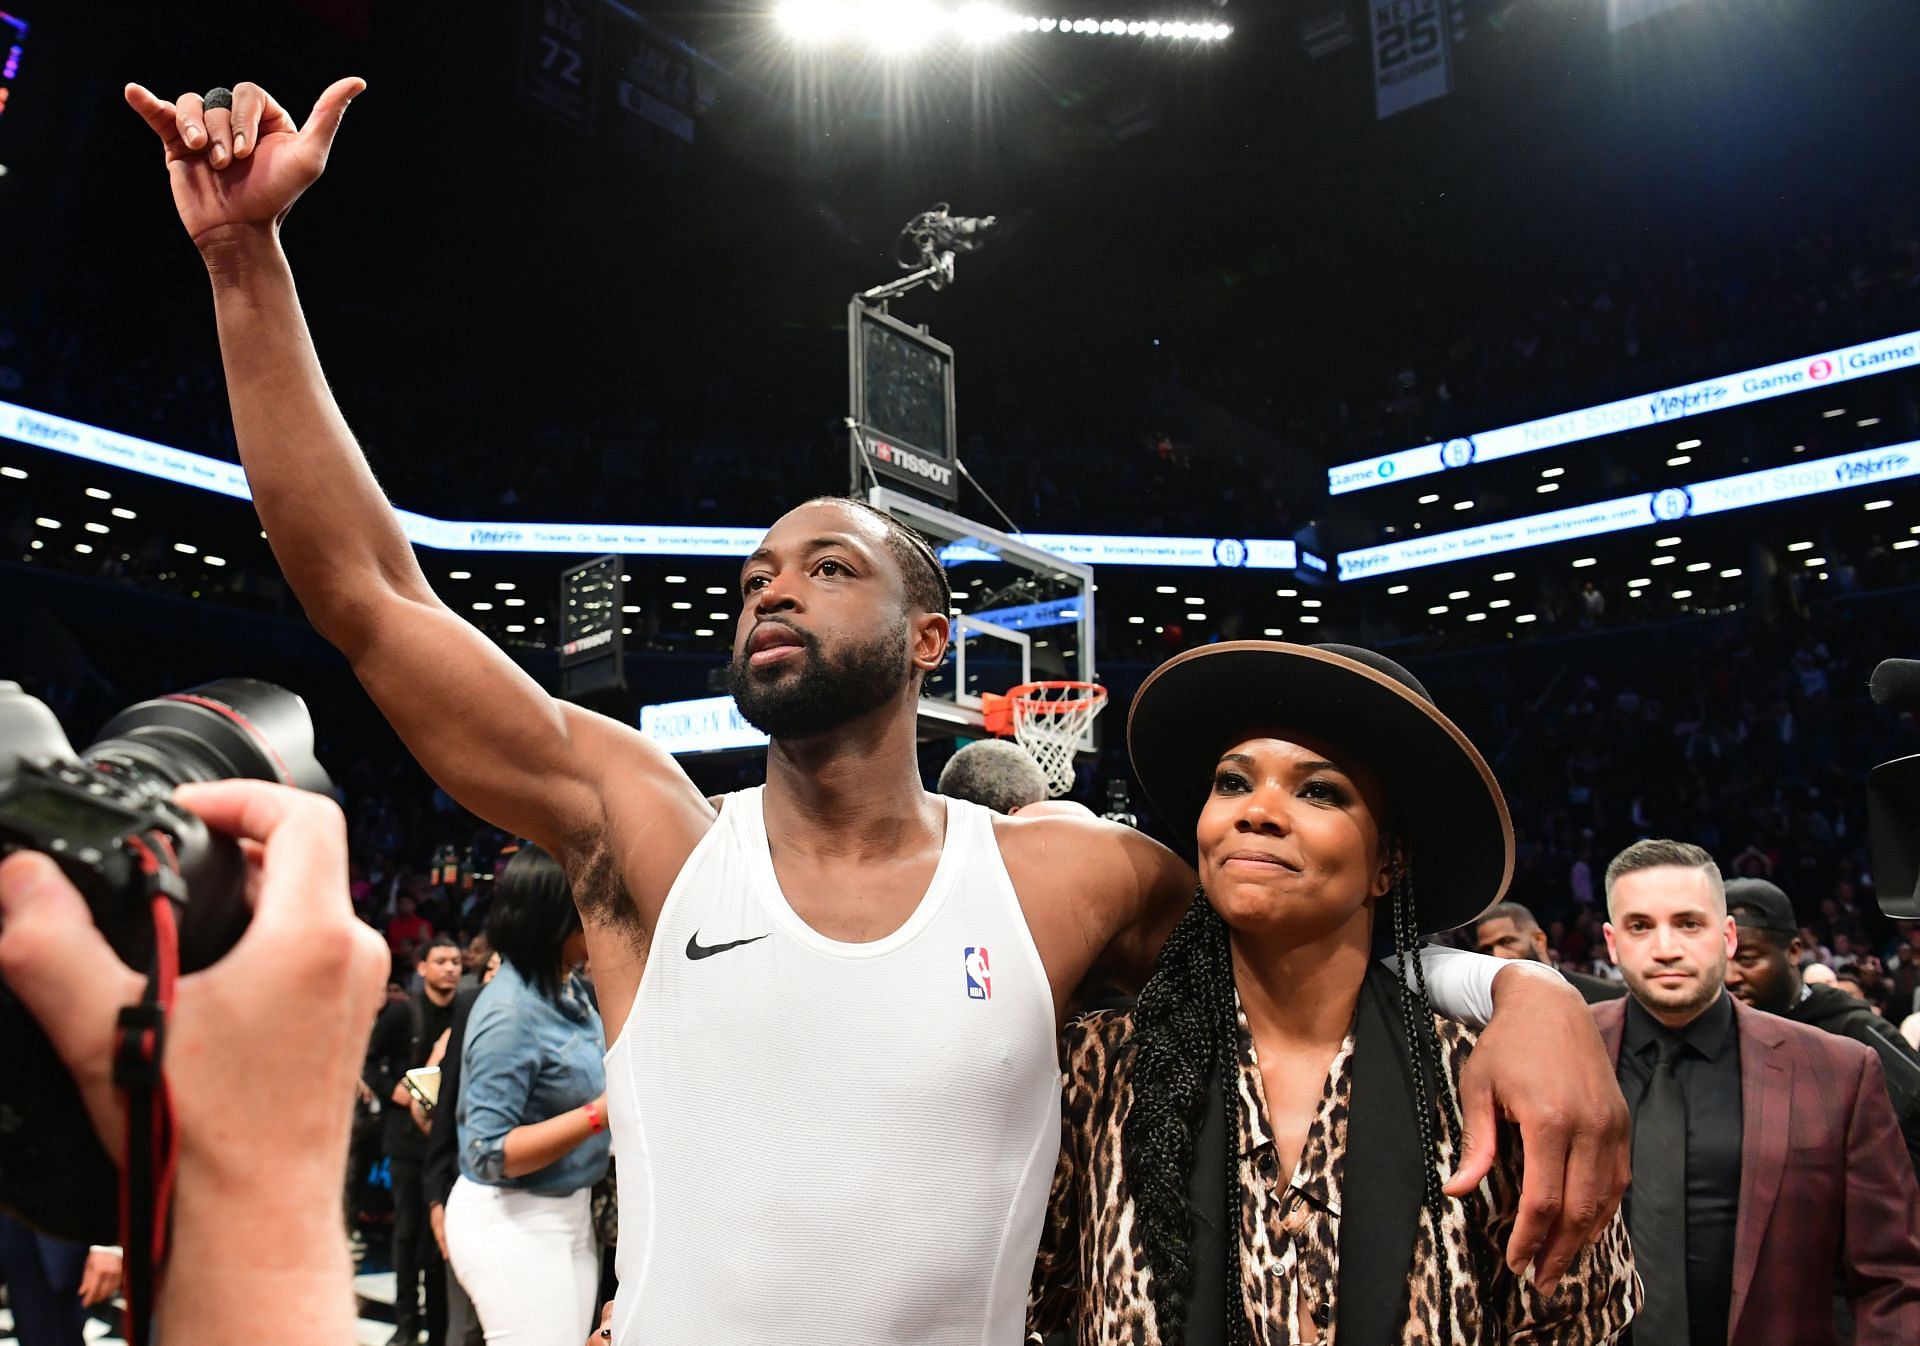 Dwyane Wade of the Miami Heat thanks the fans with his wife, Gabrielle Union, after his last game.